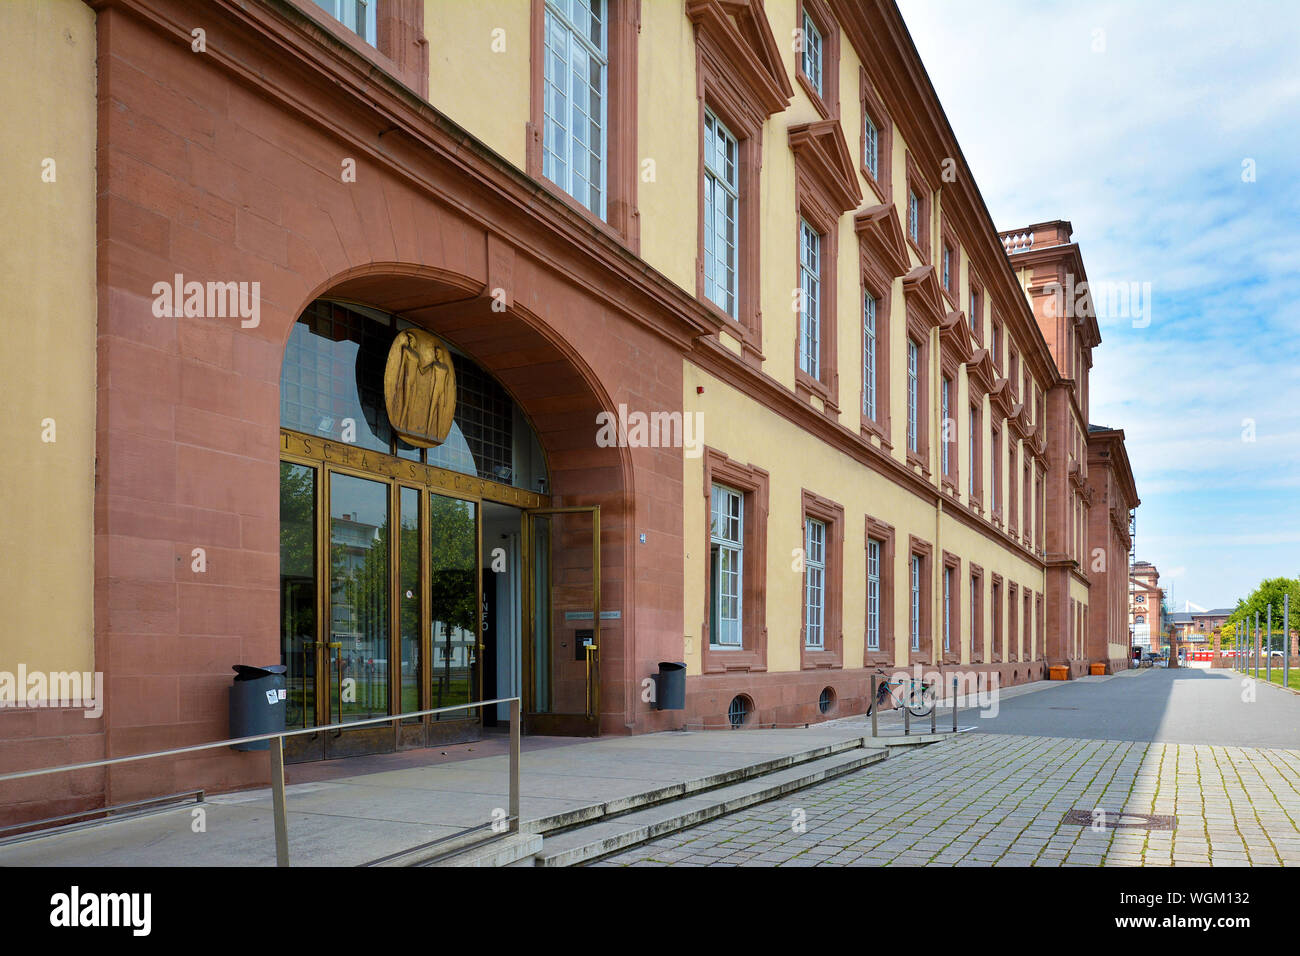 Mannheim, Germany - July 2019: Side view of facade with main entrance of old historical baroque building of public research university of Mannheim Stock Photo